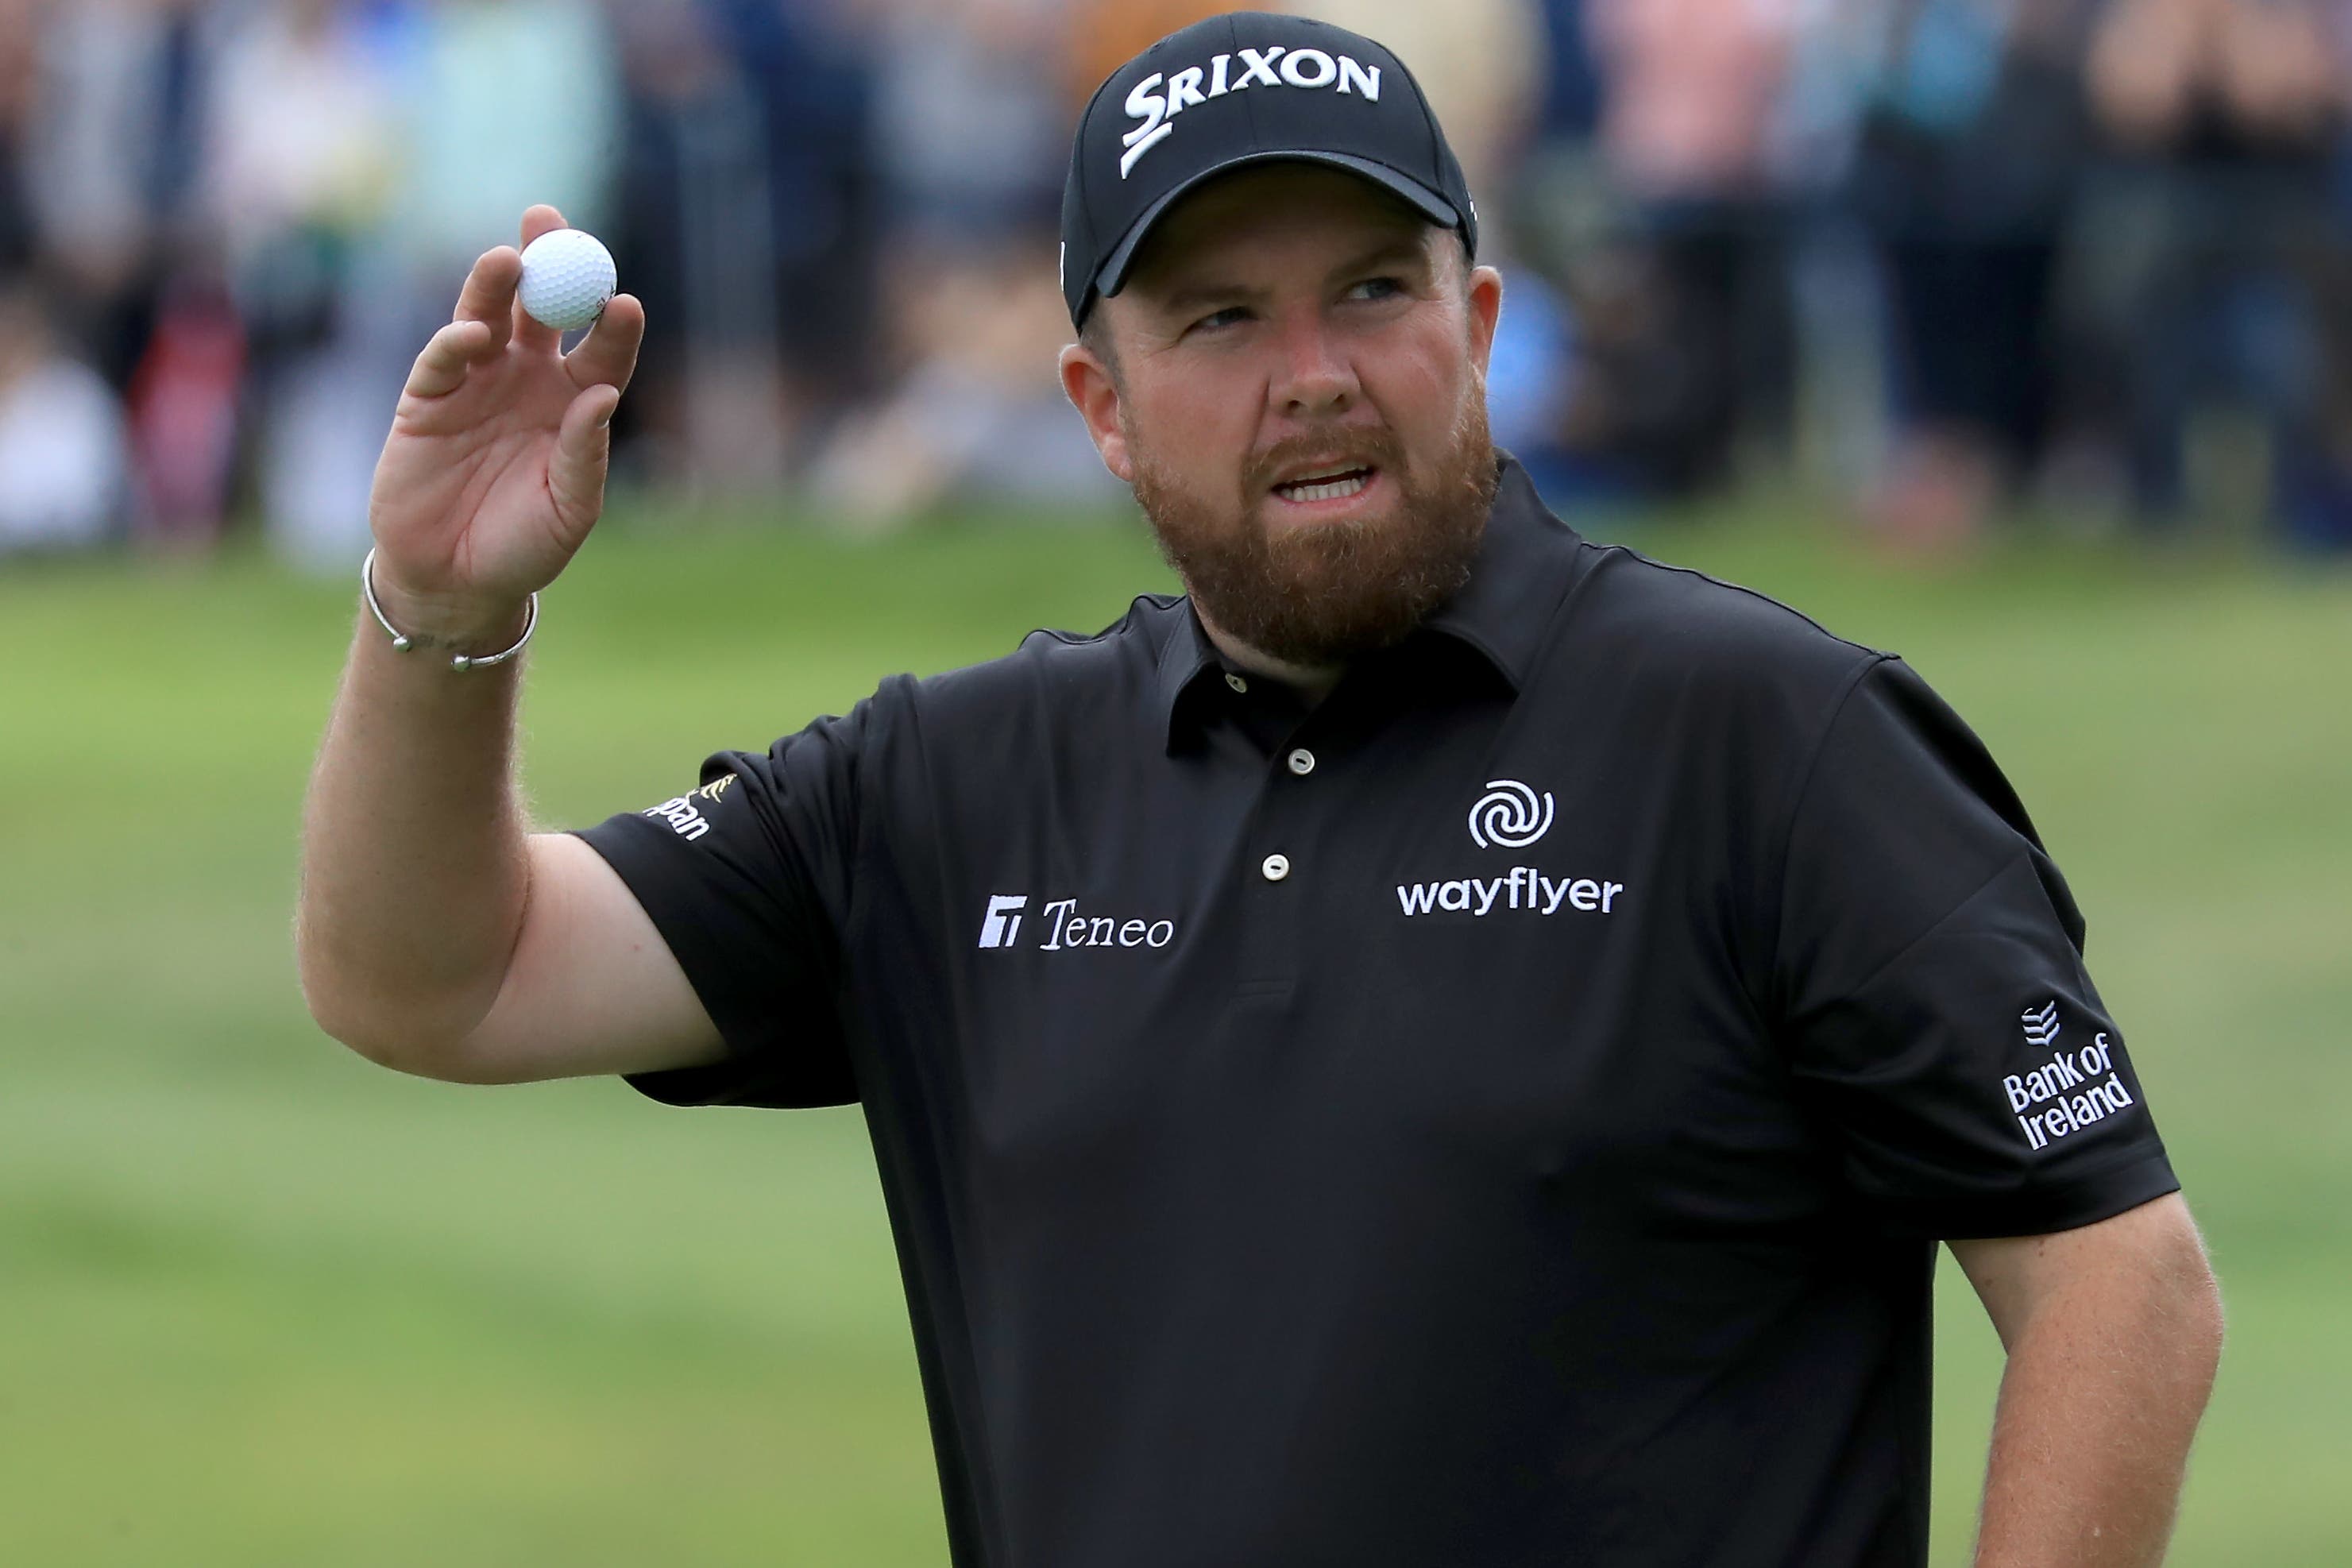 Shane Lowry feels he has been repaid for bad luck suffered at Honda Classic The Independent